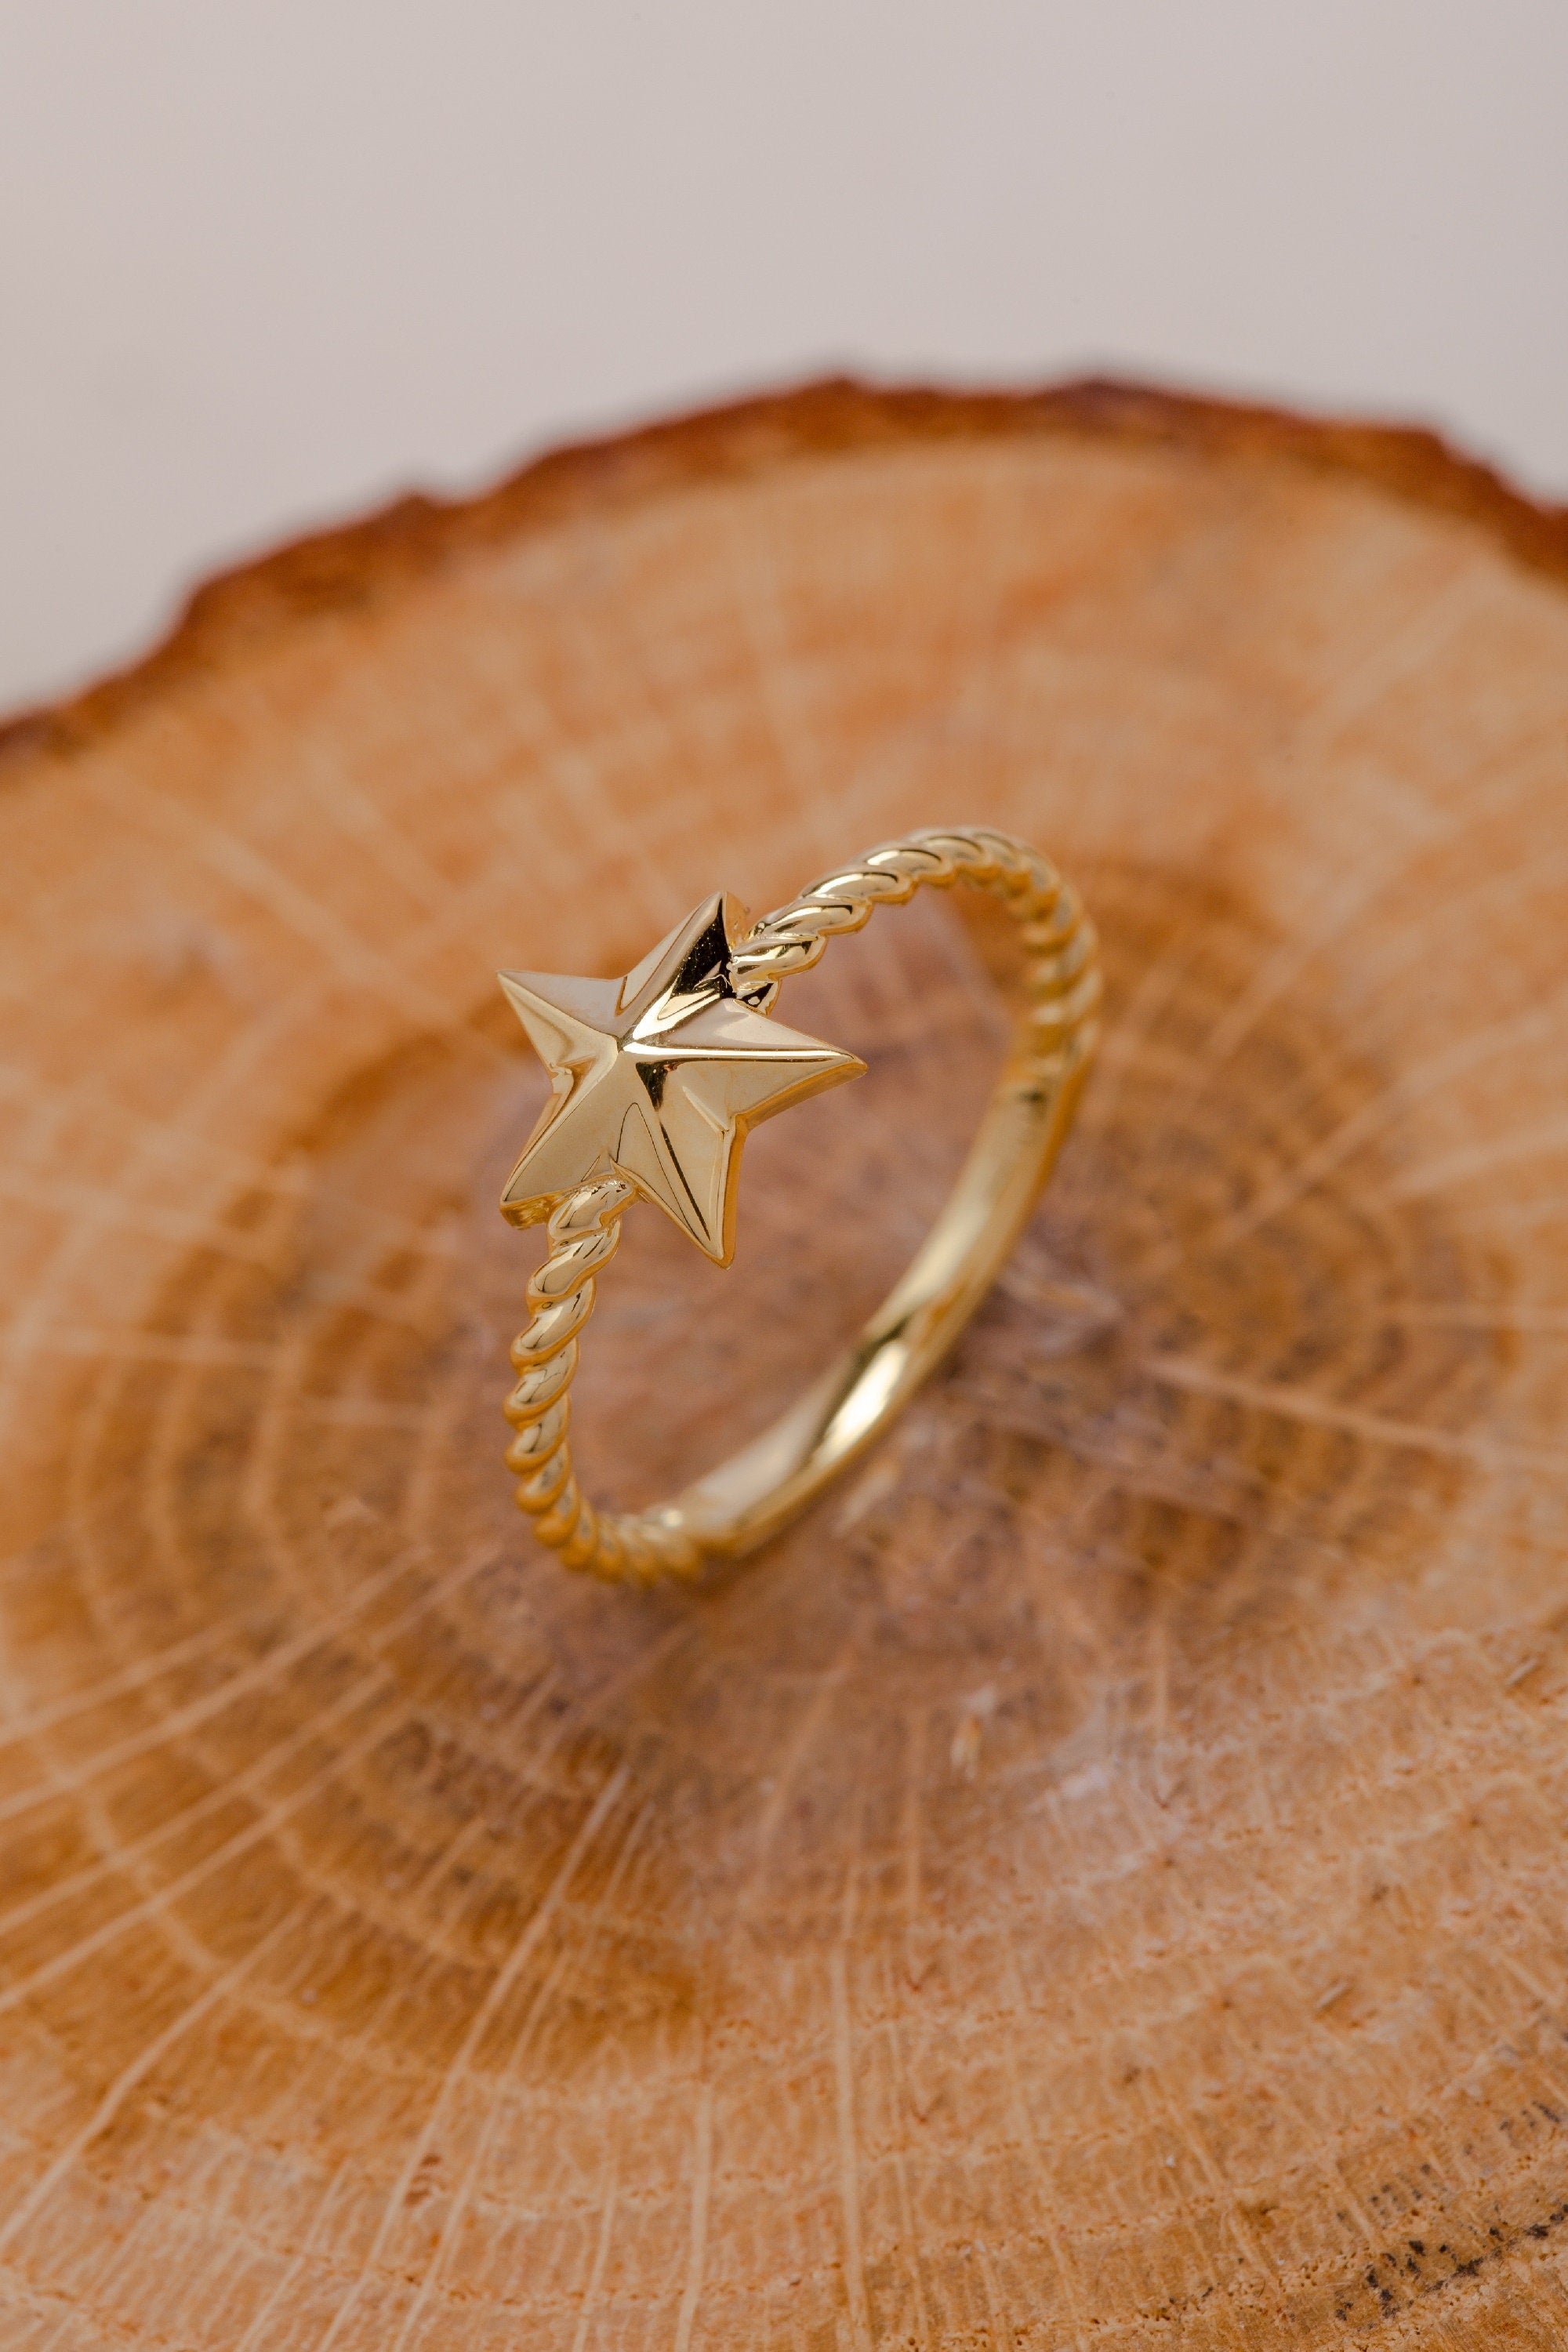 10K Yellow Gold Stunning Star Shaped Ring- Celestial Jewelry, Stellar Design- Perfect Gift for Girlfriend, Women, Sparkling Star-Shaped Ring